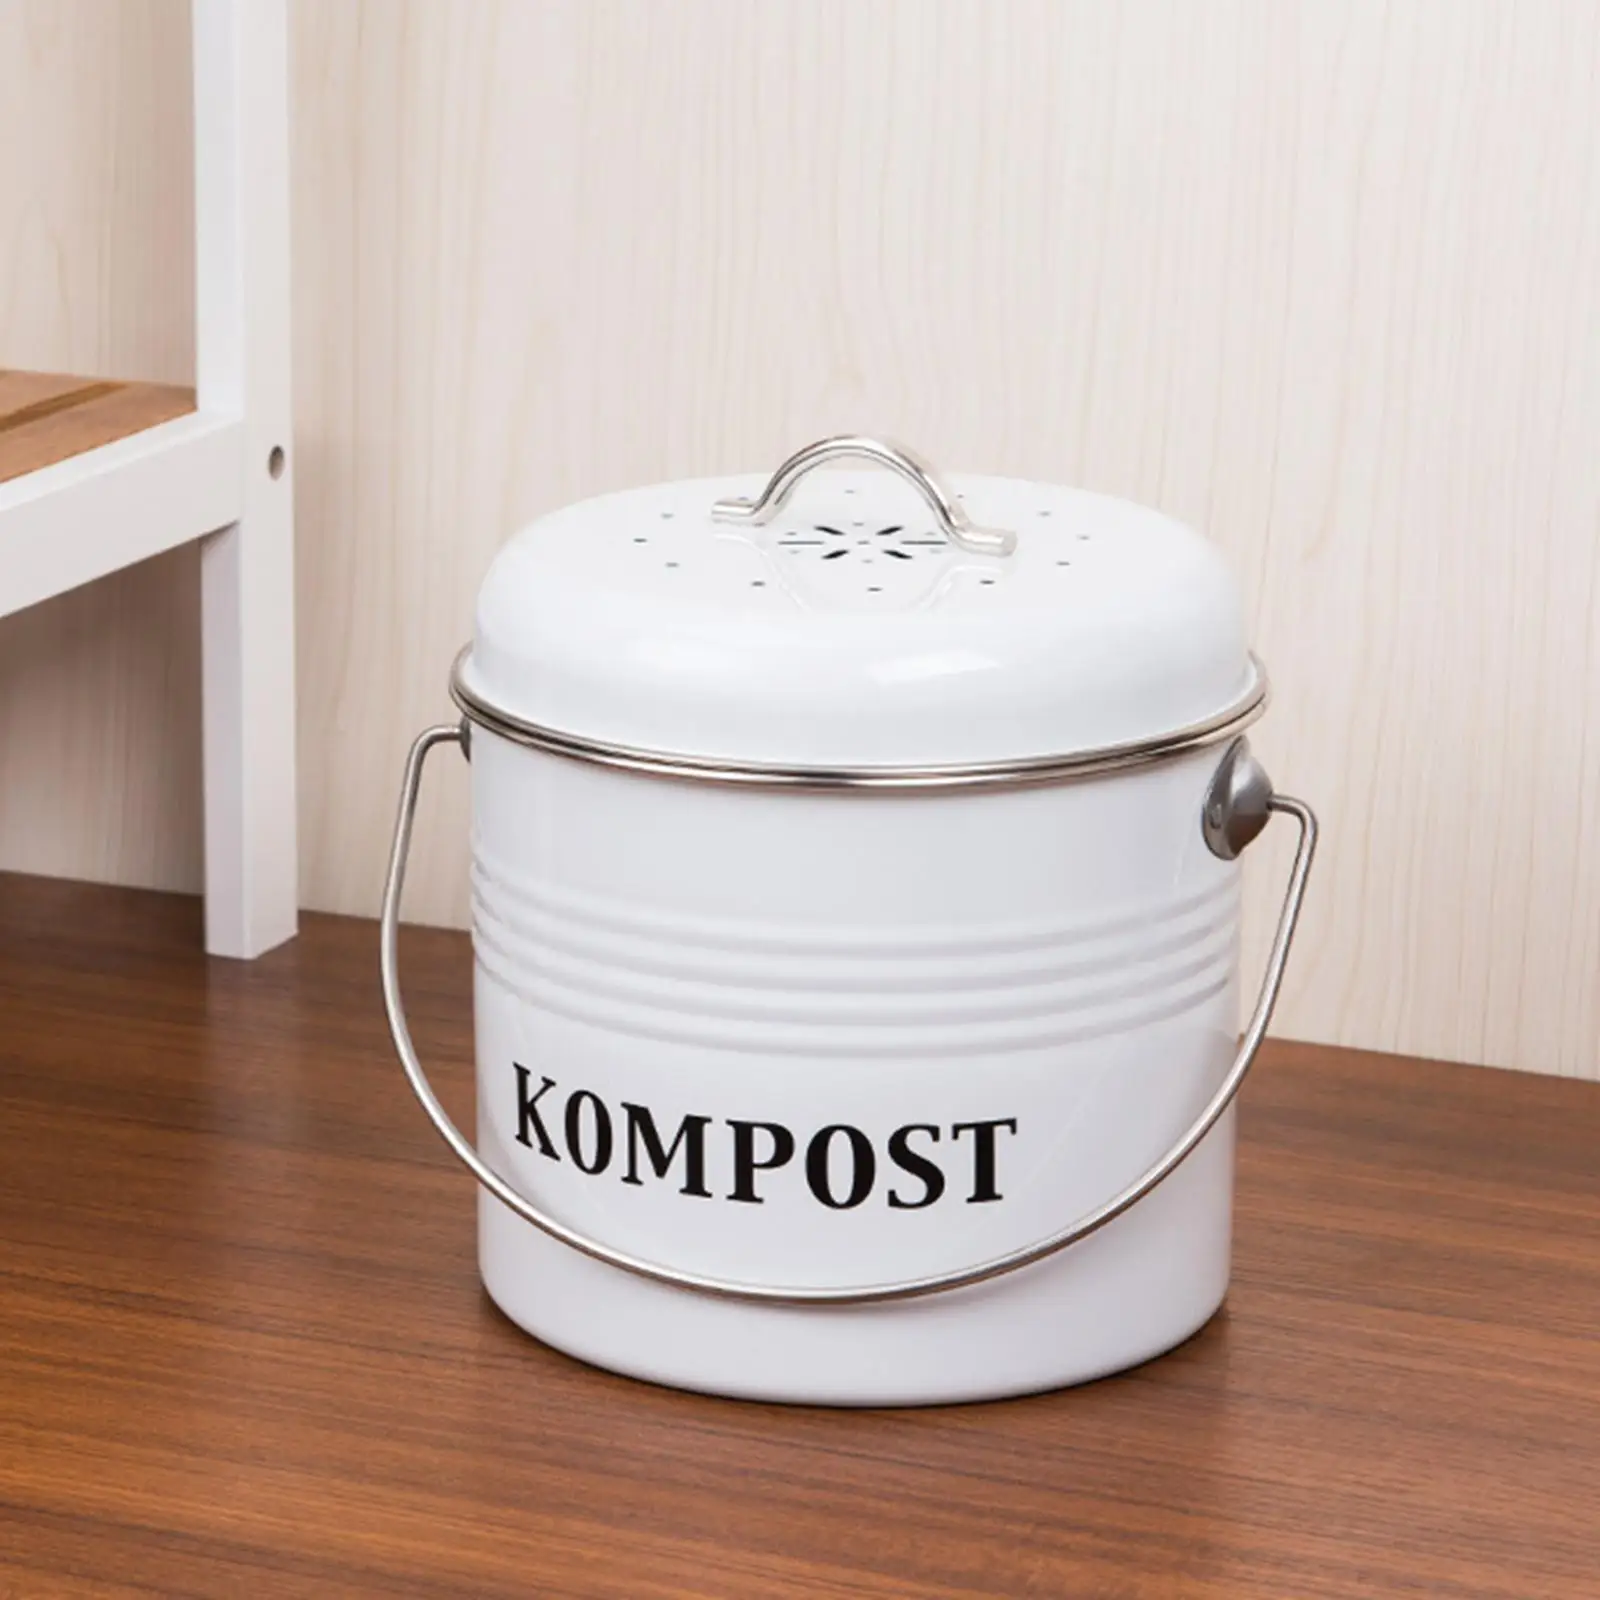 home and garden Compost , Odor Filtrion Compost Caddy  Indoor Trash  Food Waste with Carrying Handle  clean Kitchen Composter